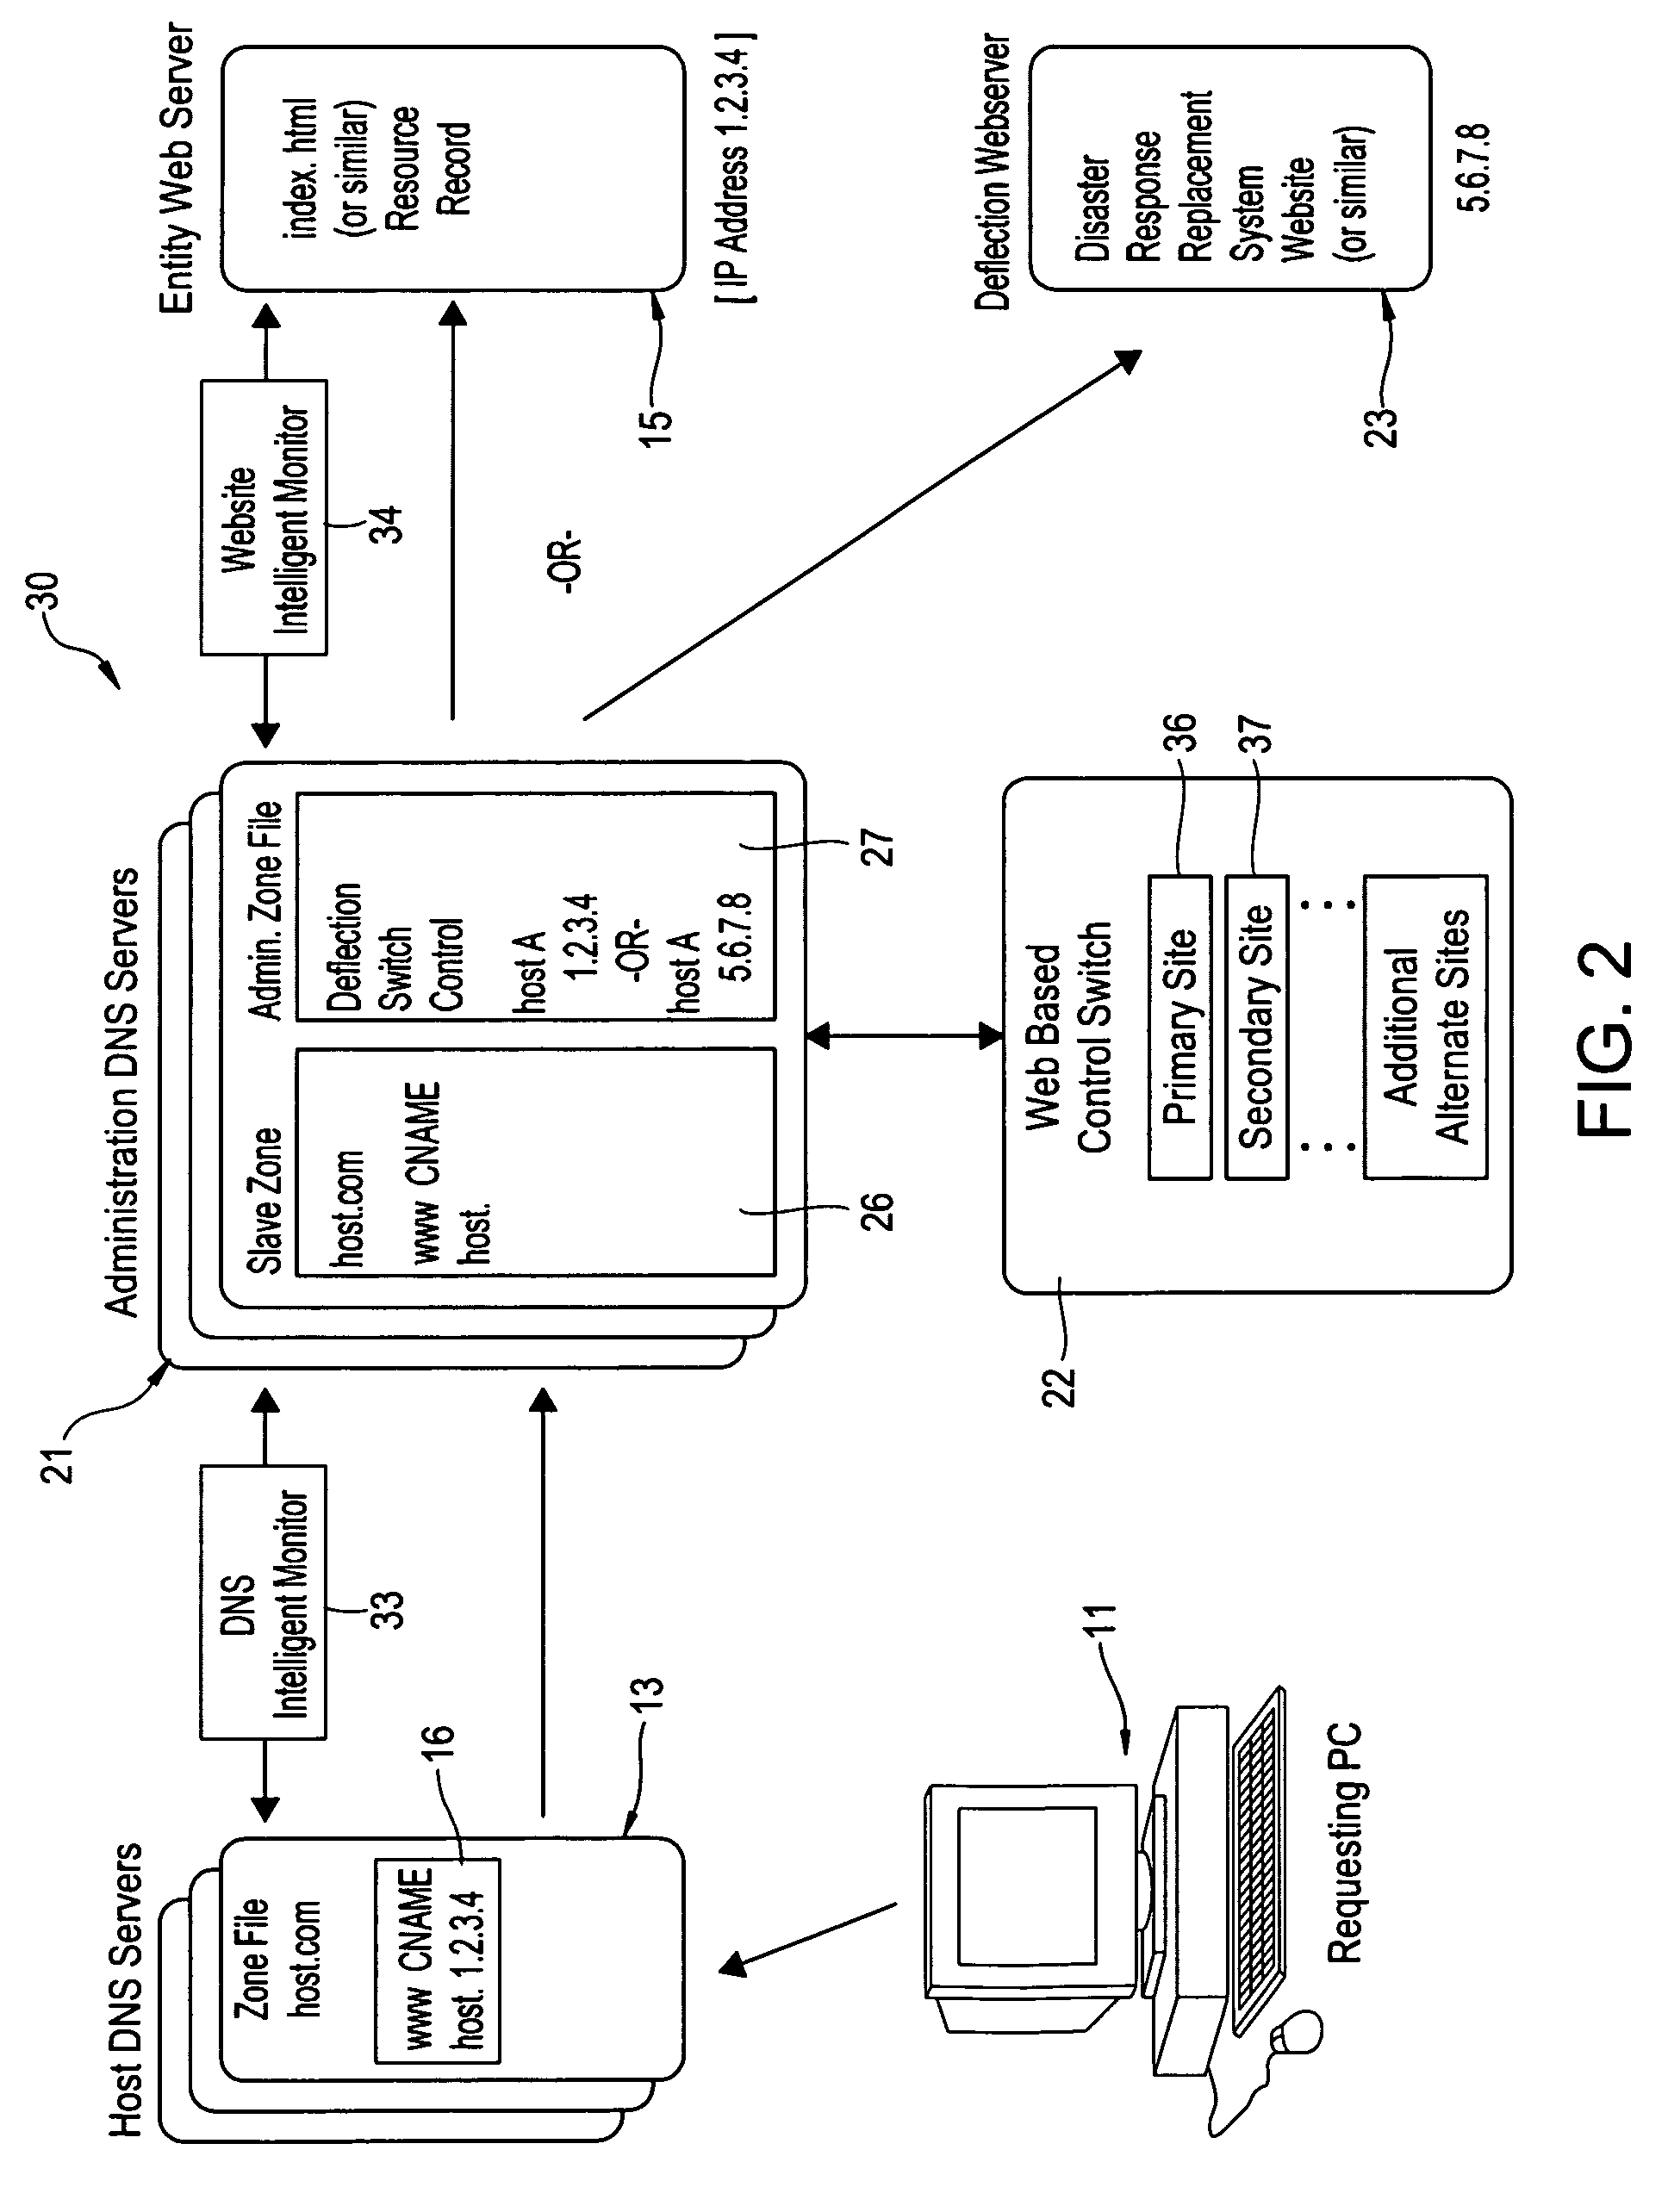 System and method for redirecting a website upon the occurrence of a disaster or emergency event